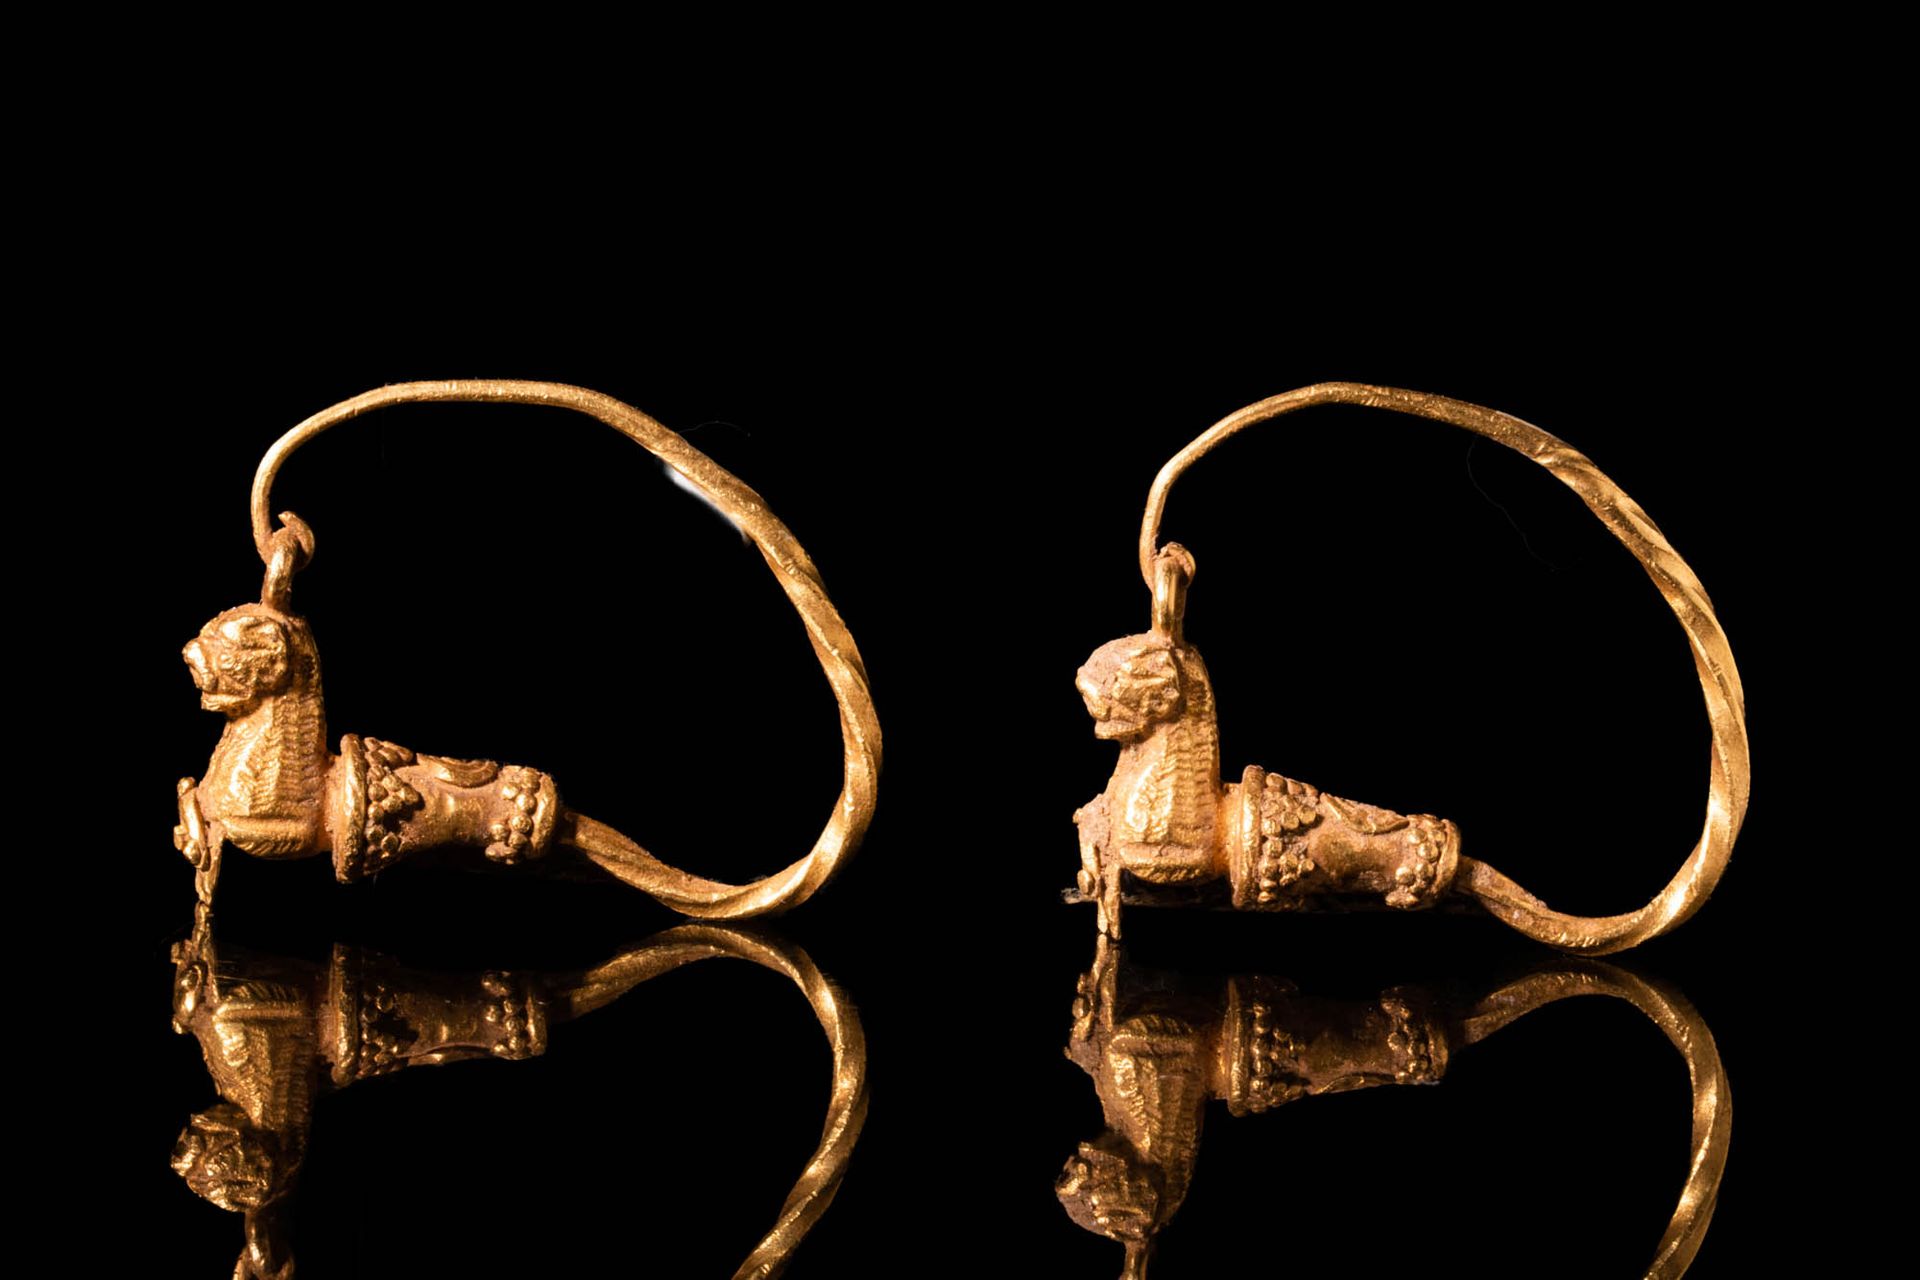 HELLENISTIC GOLD EARRINGS WITH ANIMAL PROTOMES Ca. 400 - 200 V. CHR.
Ein Paar 21&hellip;